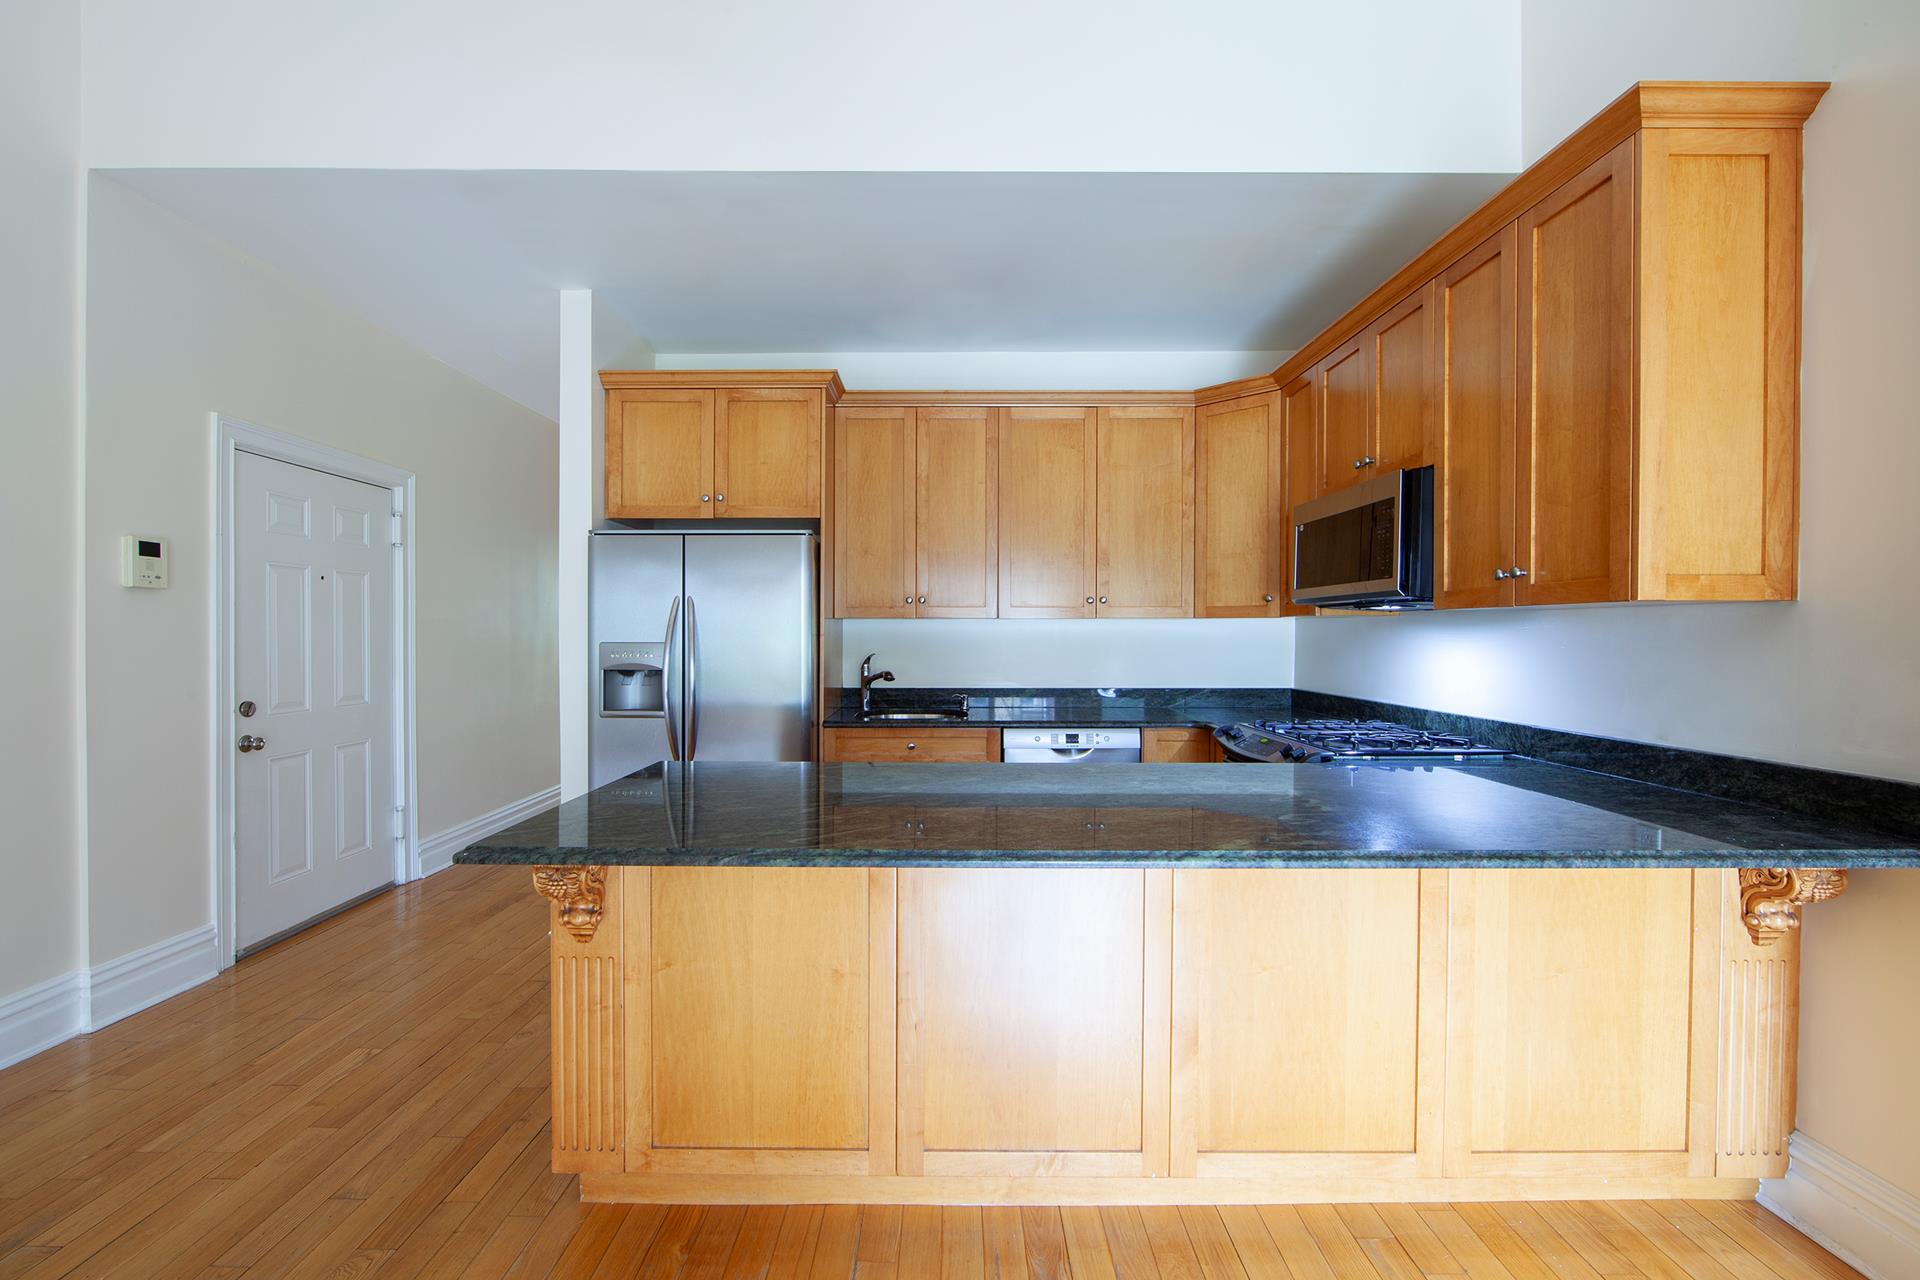 122 1st Place 2, Carroll Gardens, Brooklyn, New York - 2 Bedrooms  
2 Bathrooms  
4 Rooms - 